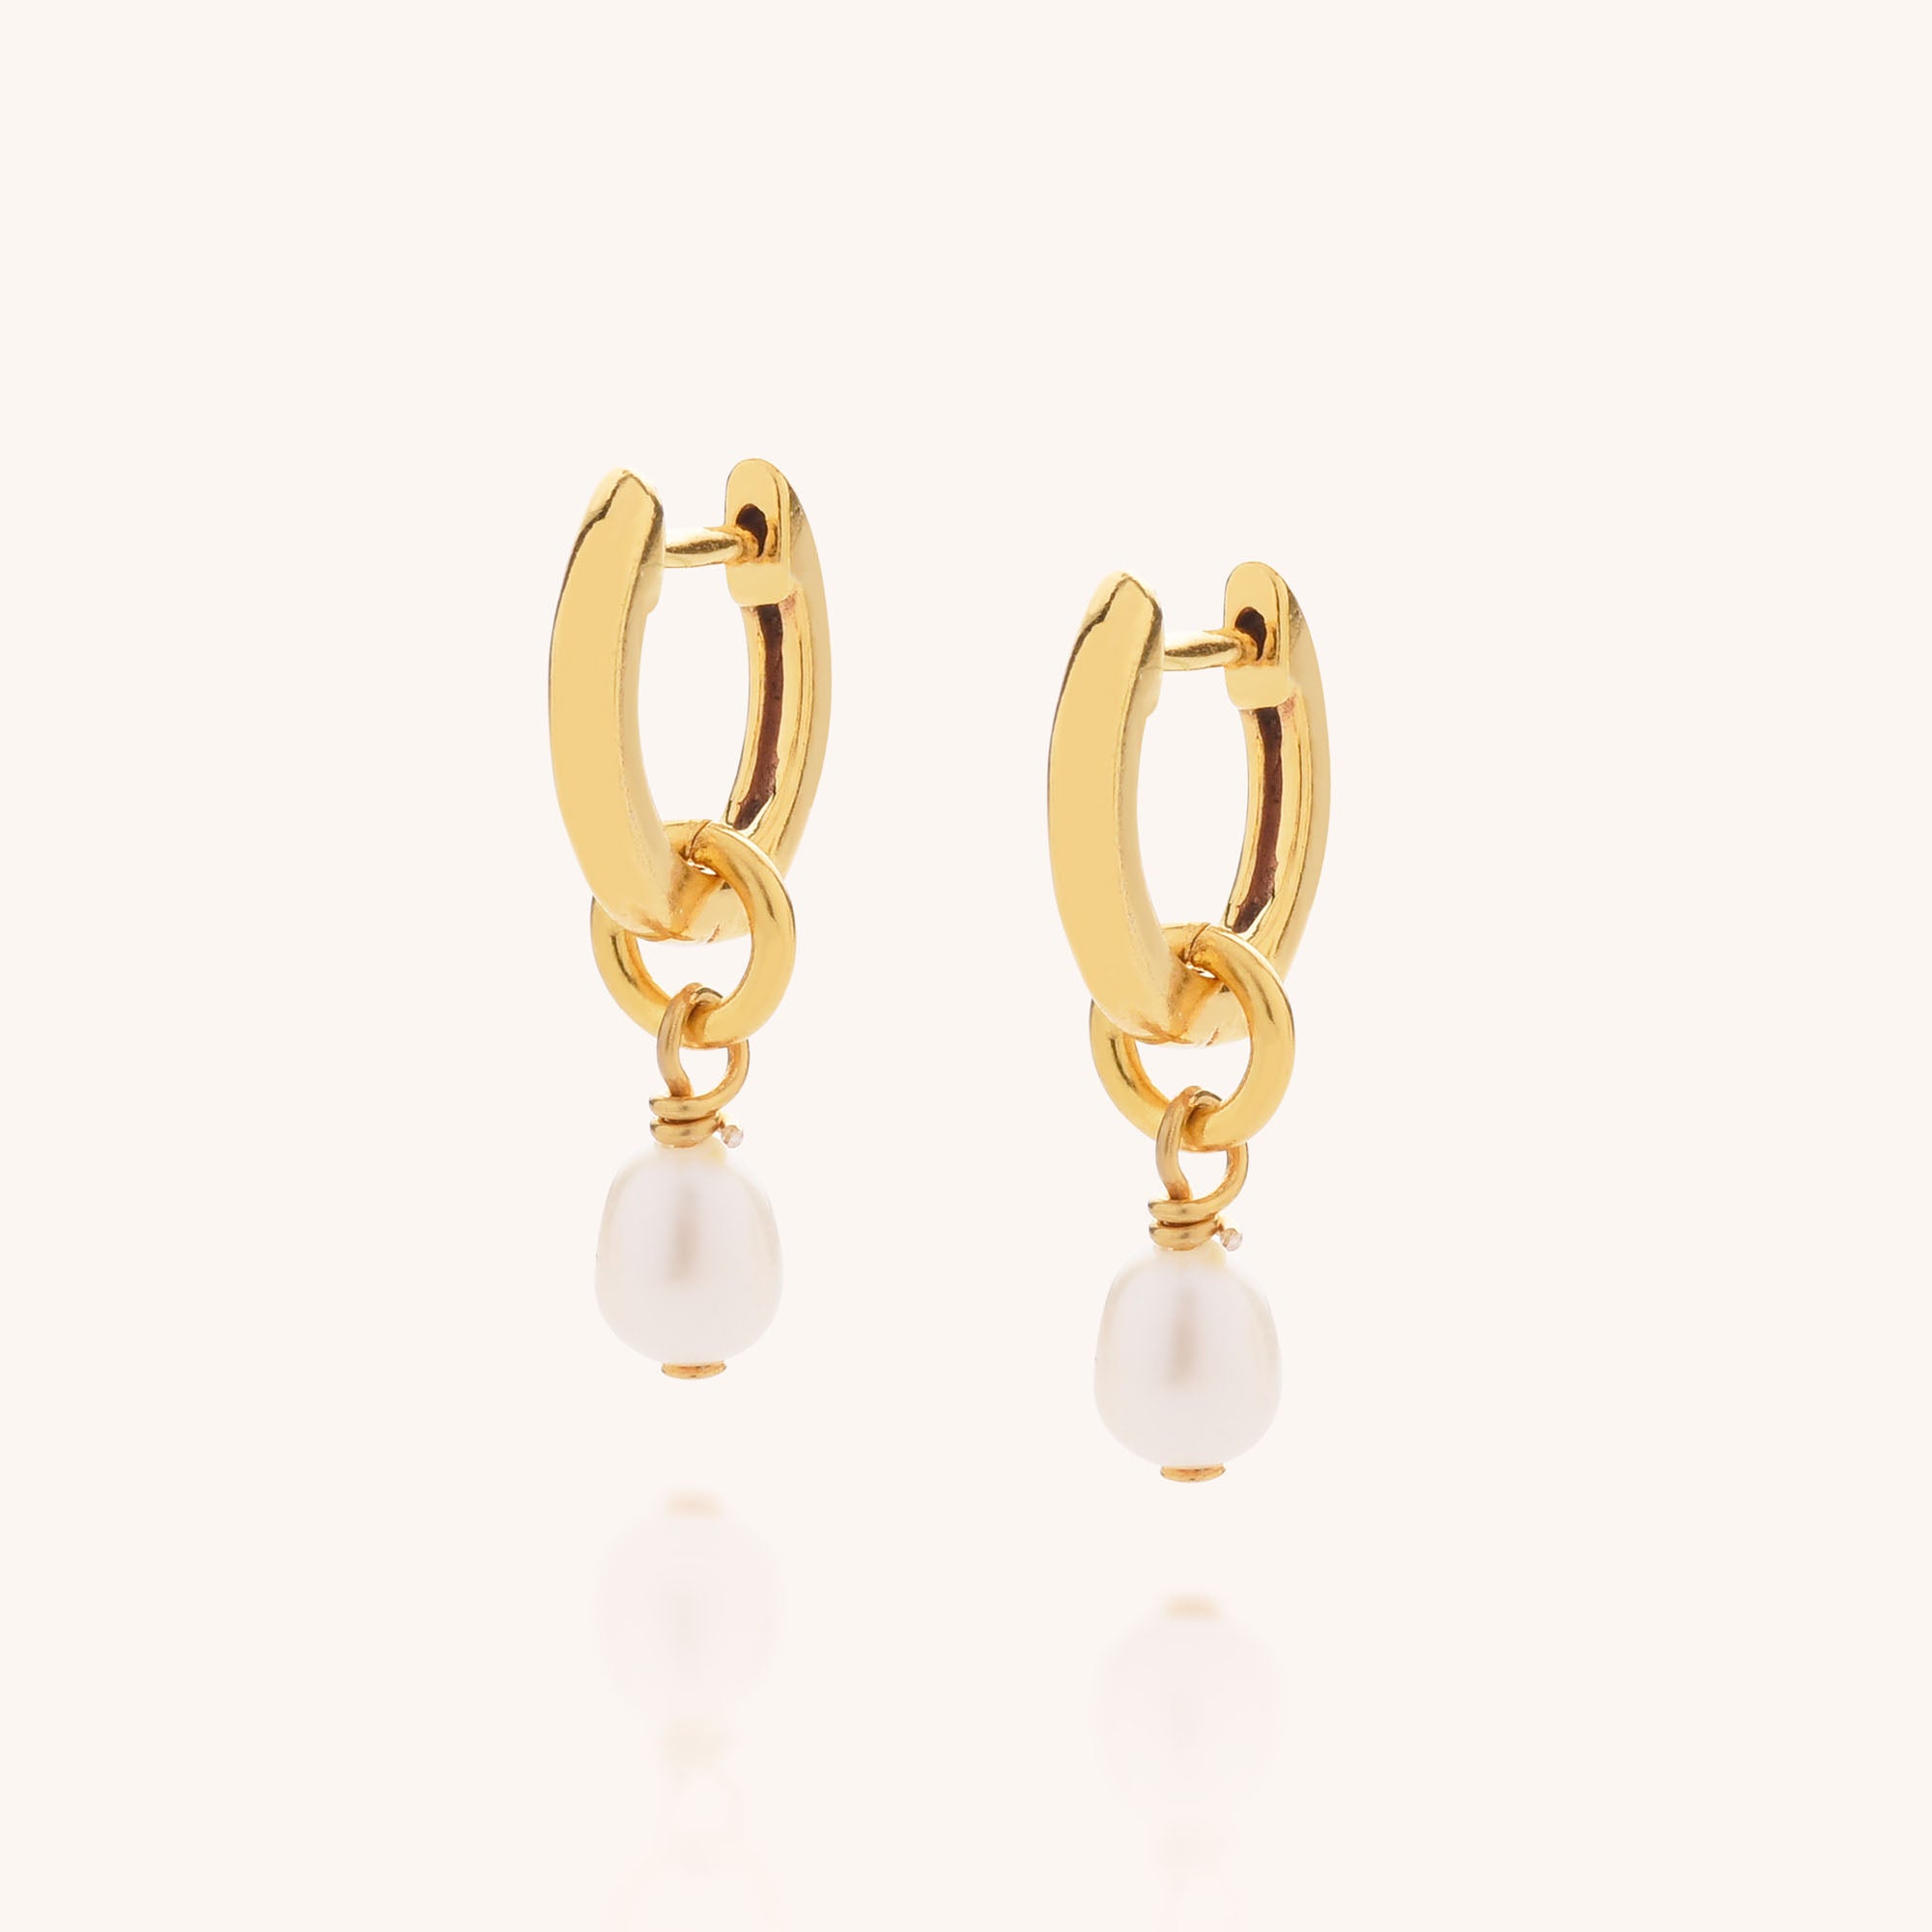 Mini white freshwater pearls dropped from a gold ear hoop